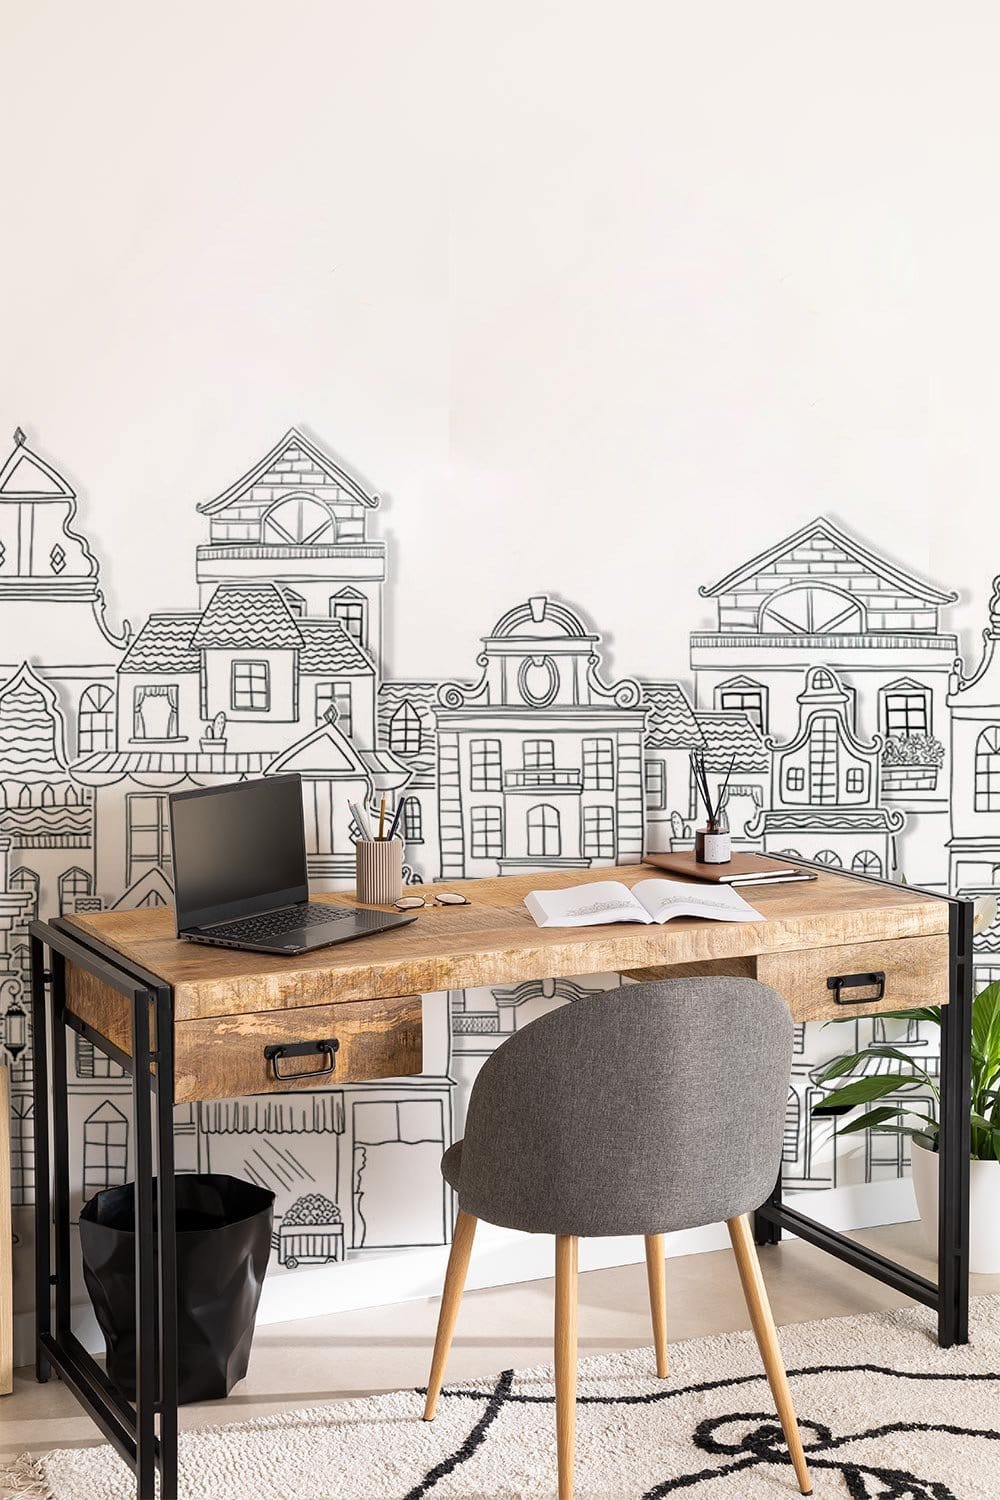 Wallpaper mural with a line drawing of buildings, perfect for decorating your home or office.